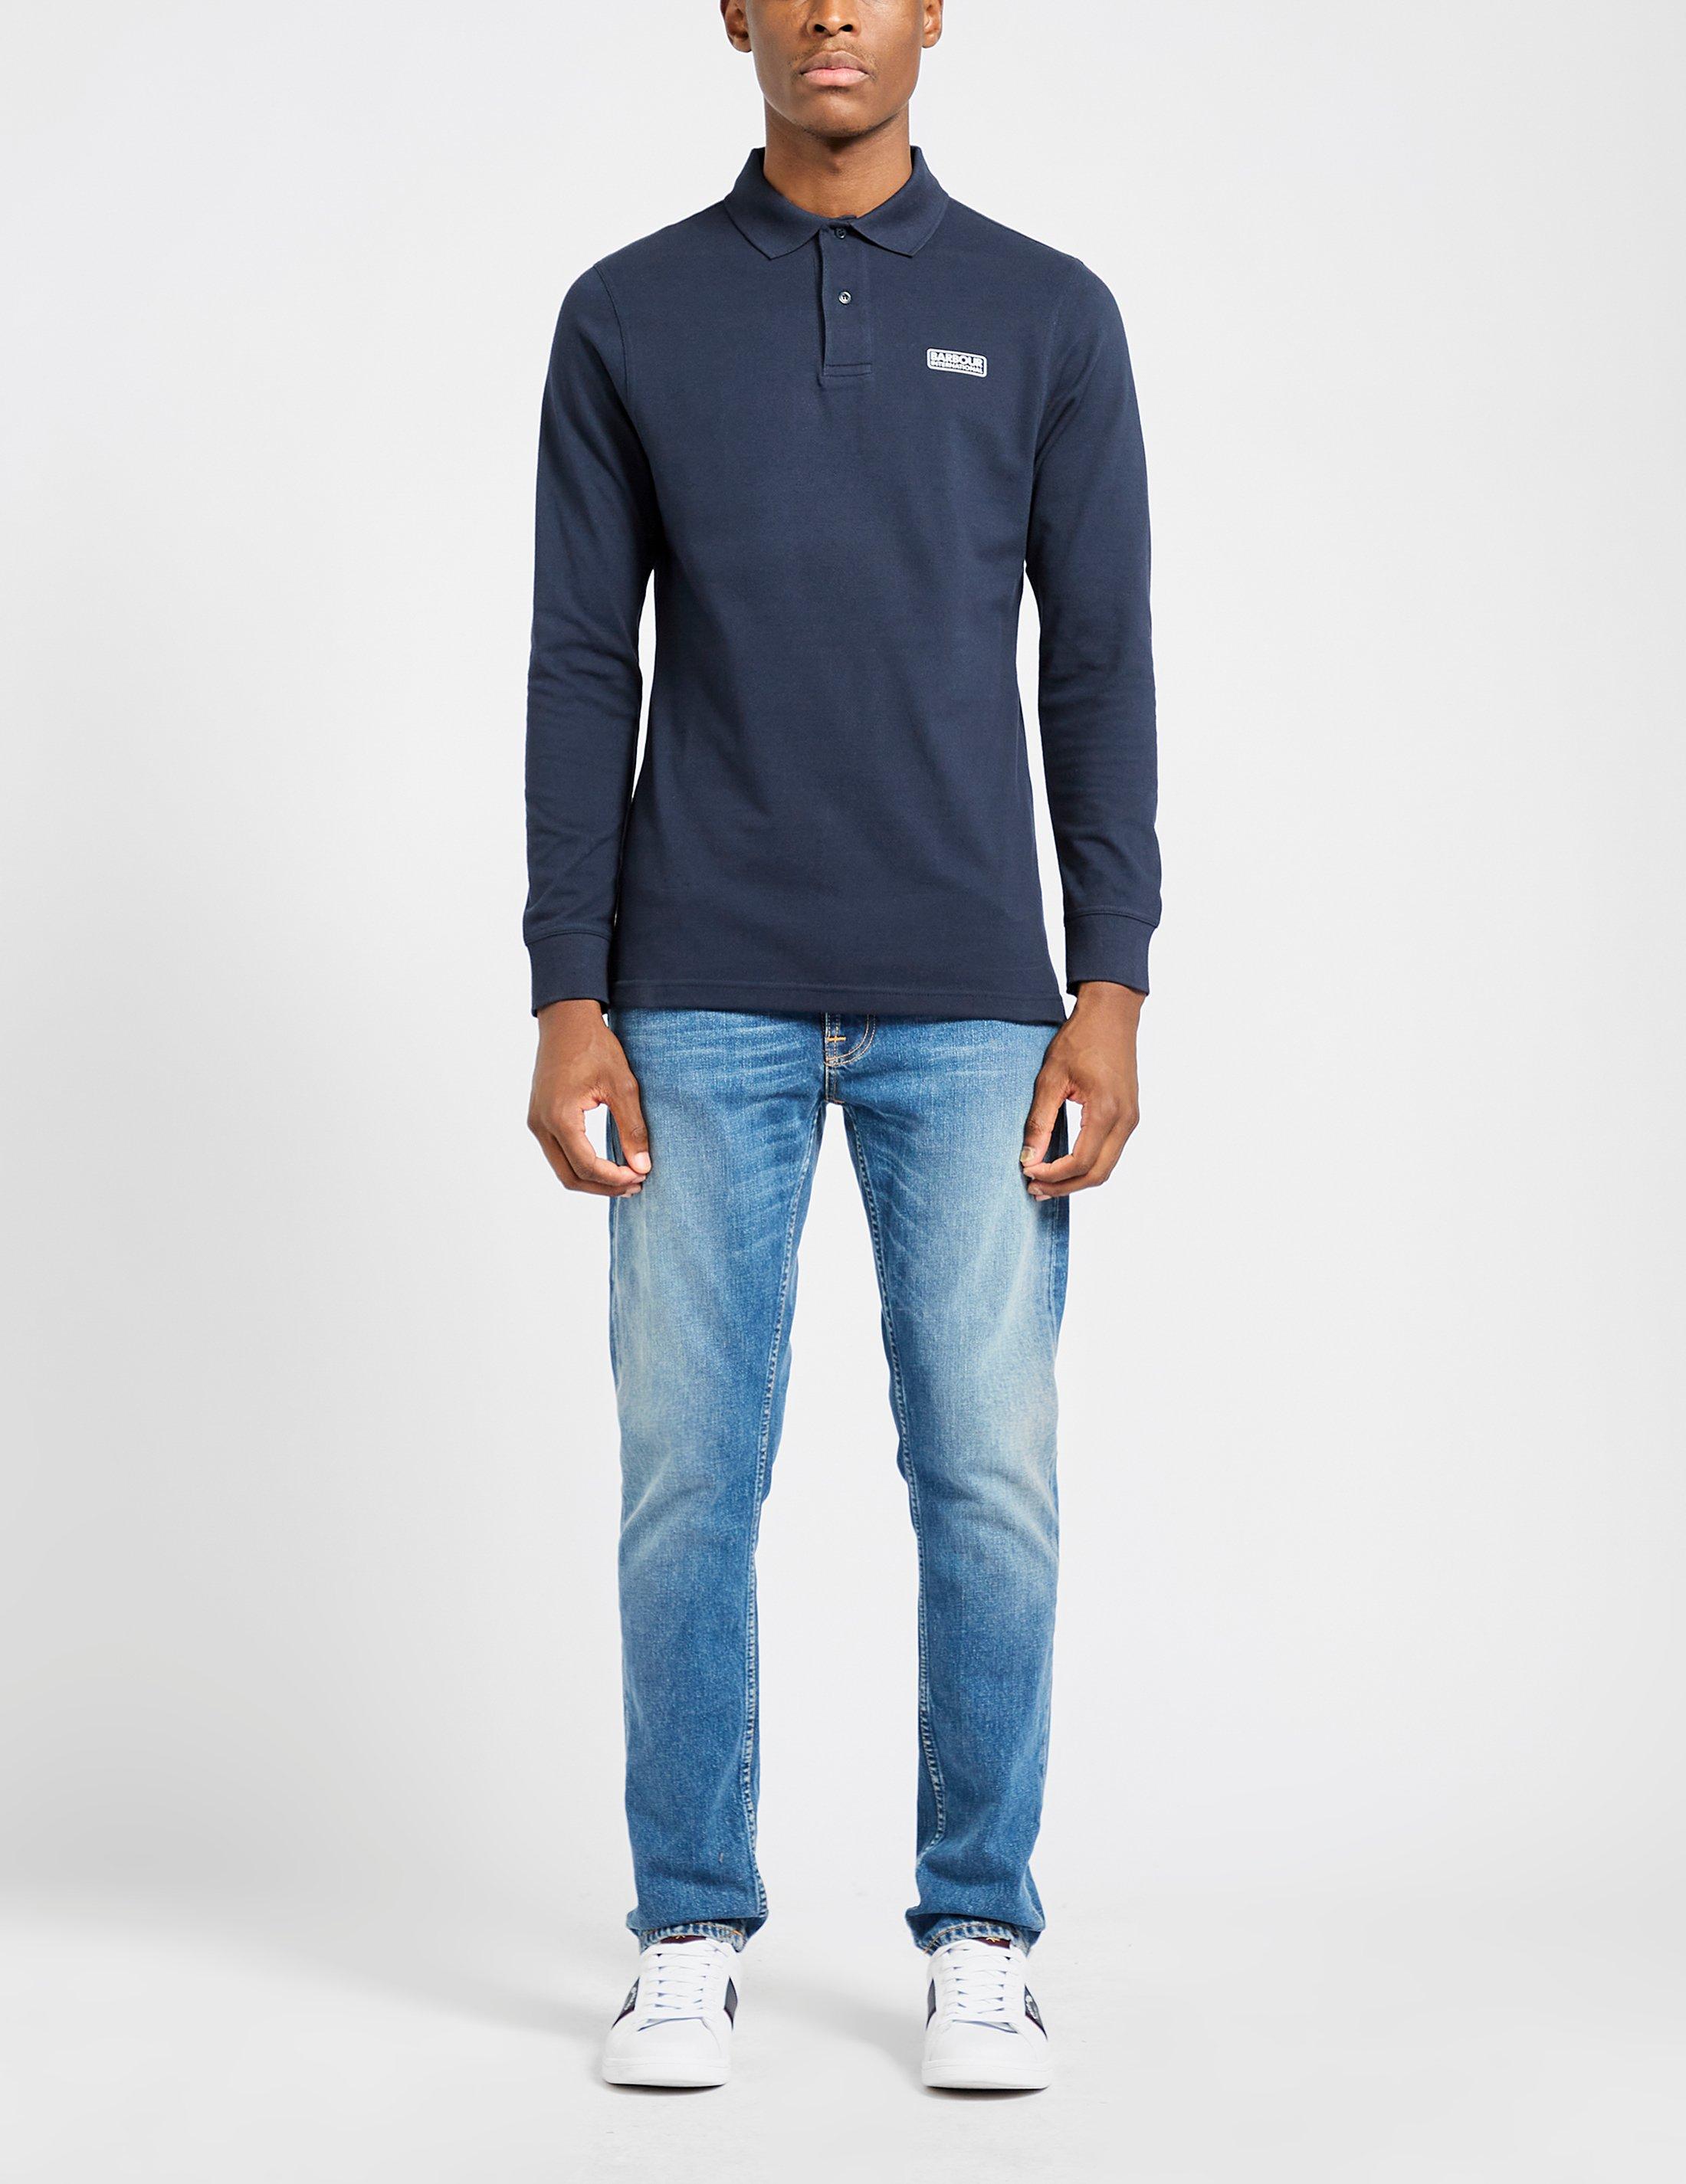 barbour polo long sleeve